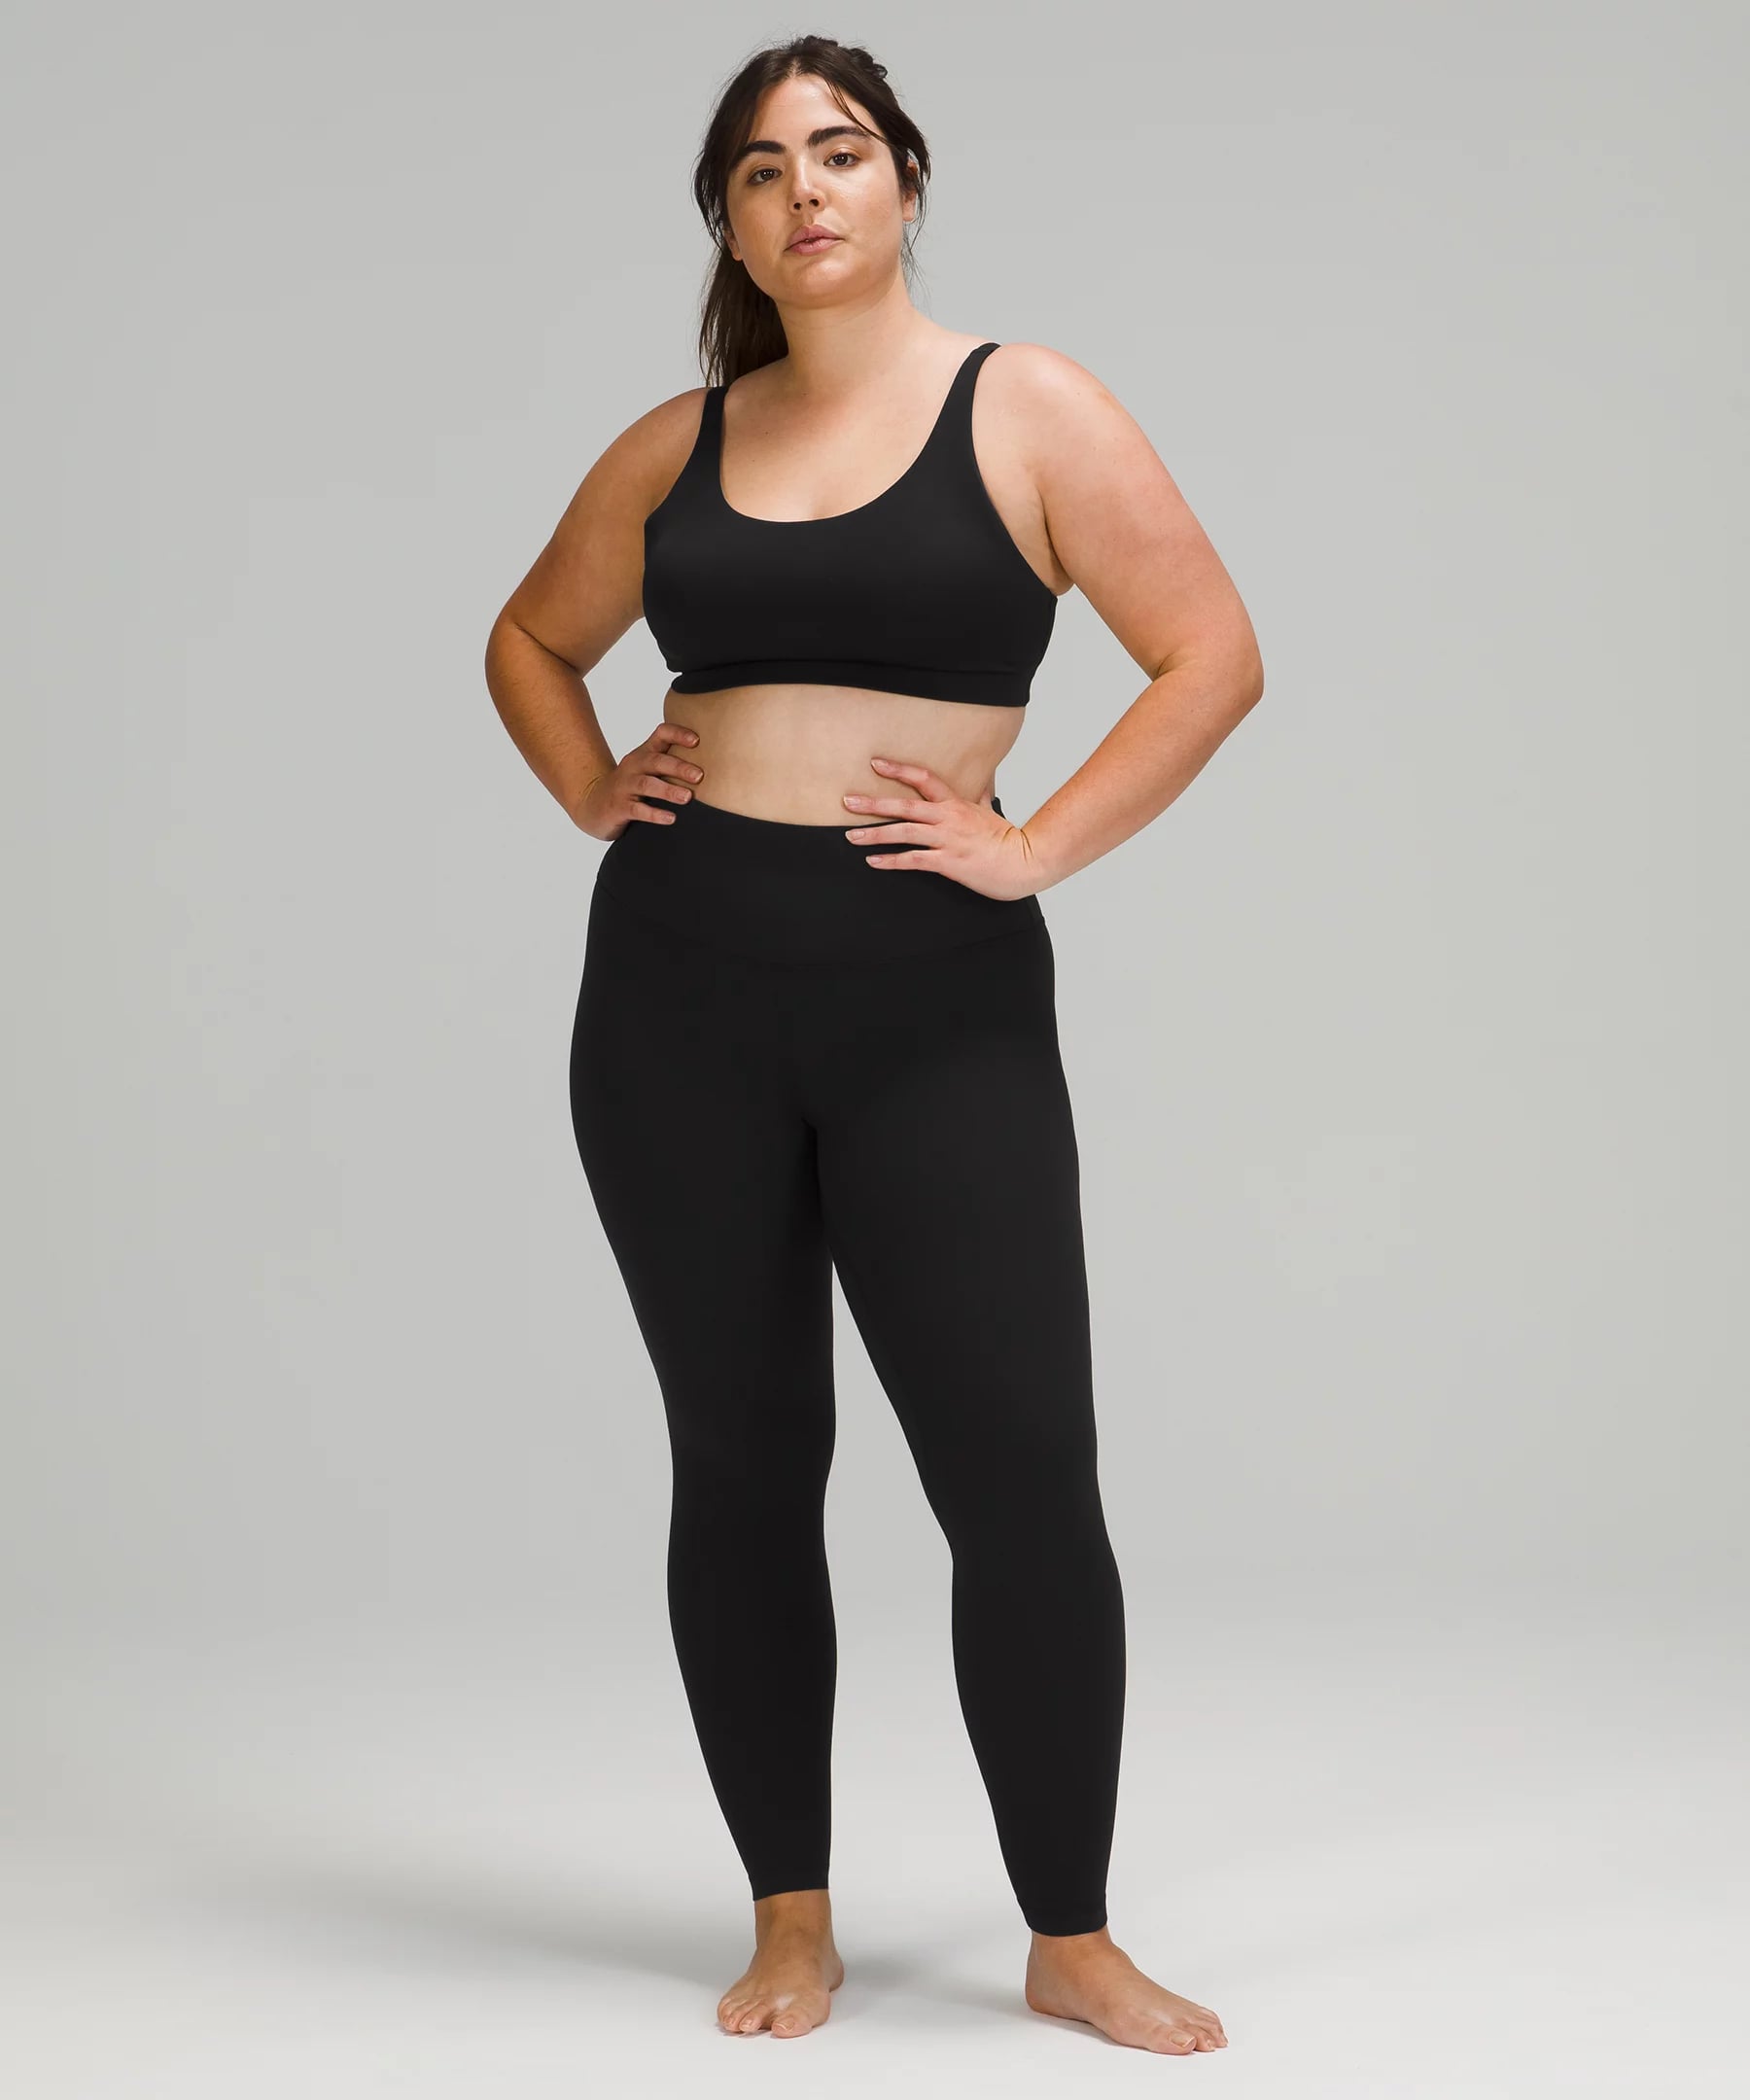  Black Workout Sets for Women: Two 2 Piece Yoga Outfit  Tracksuits High Waisted Running Biker Shorts with Strap Sport Shirt Crop  Top Exercise Running Clothes Athletic Gym Sets Matching Active Wear